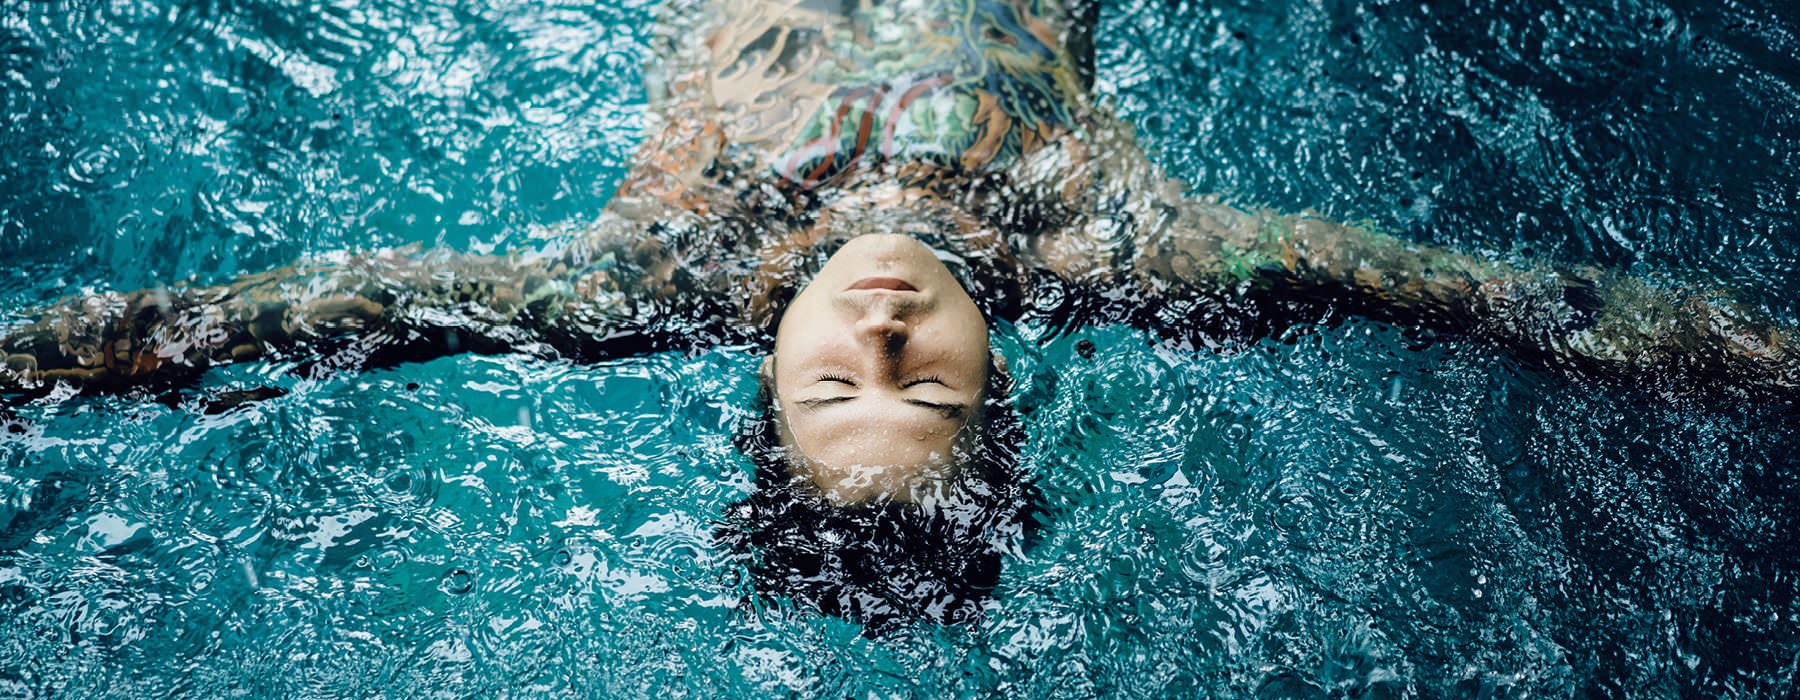 tattooed man floats on his back and relaxes in pool